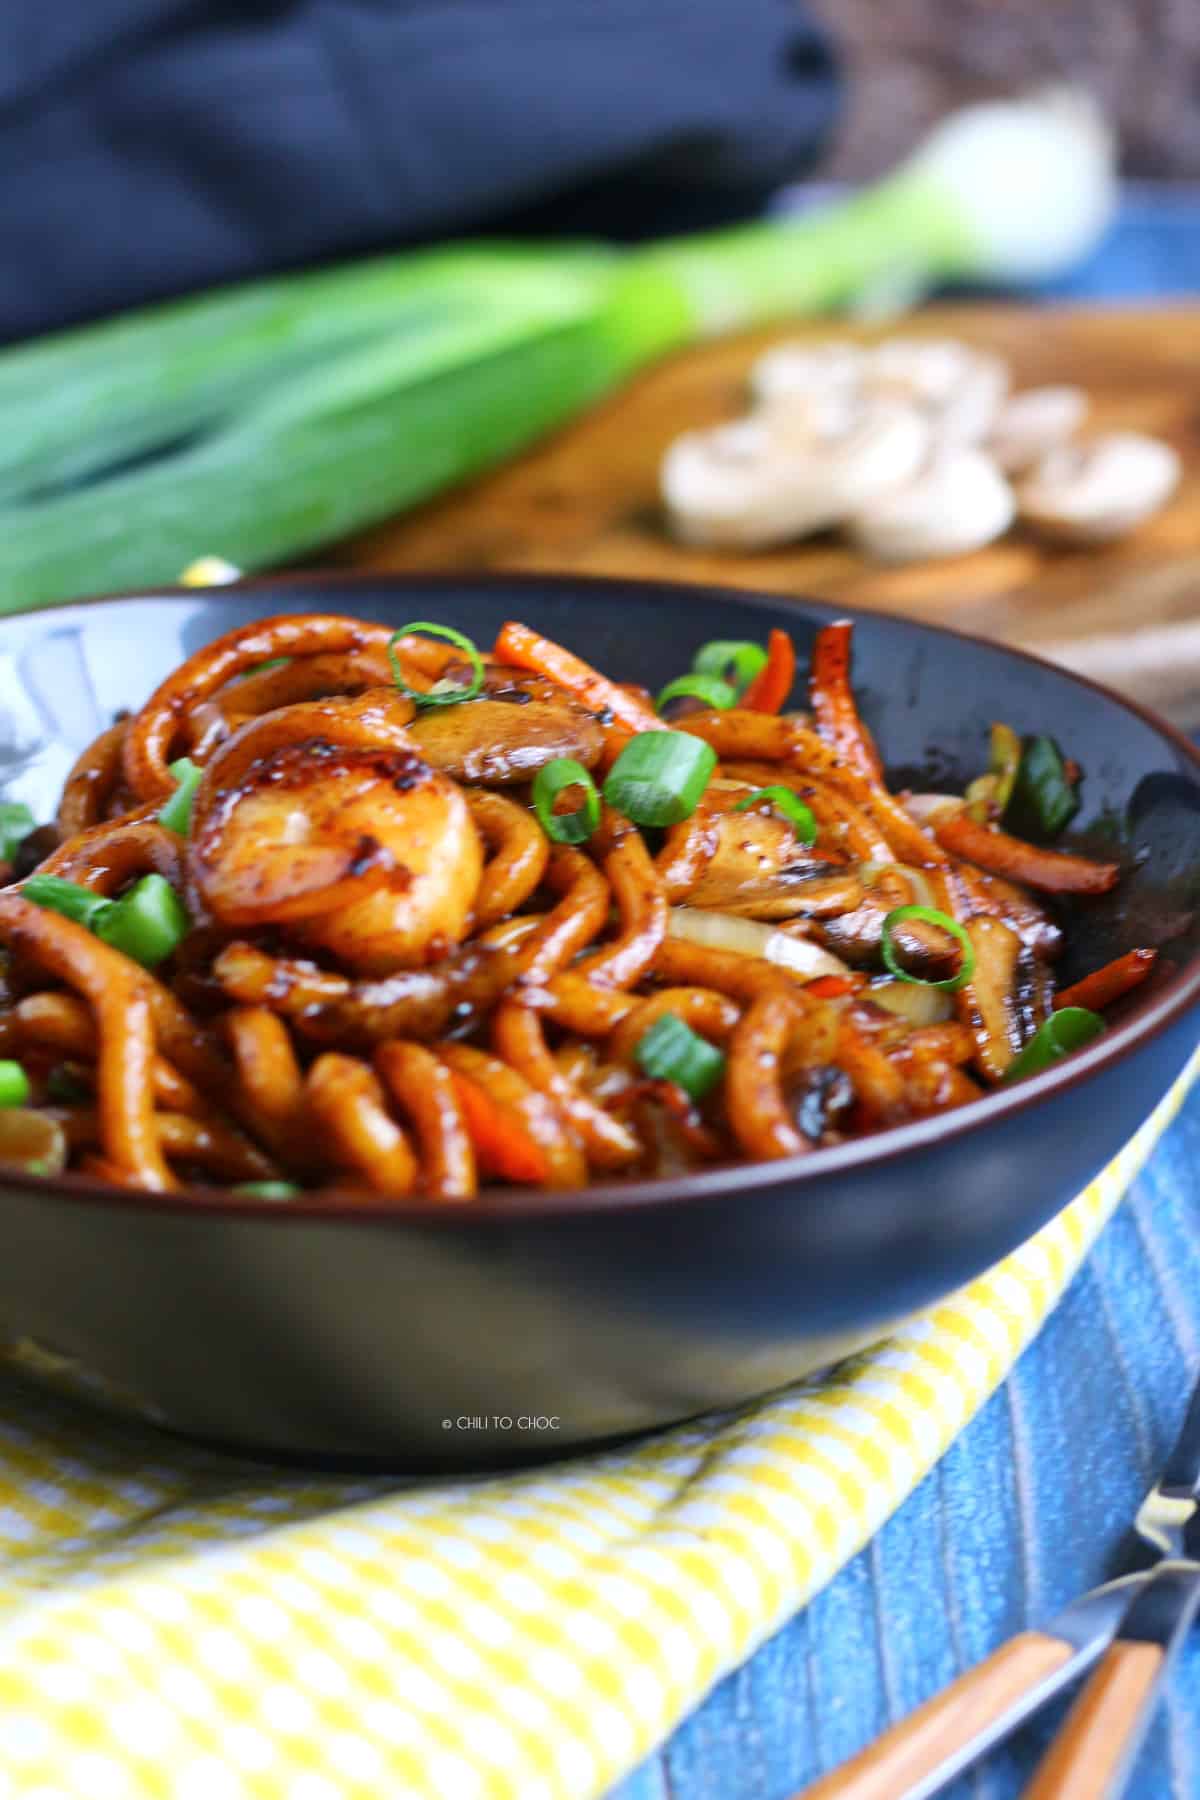 Udon noodleswith shrimps and spring onion in a deep black dish